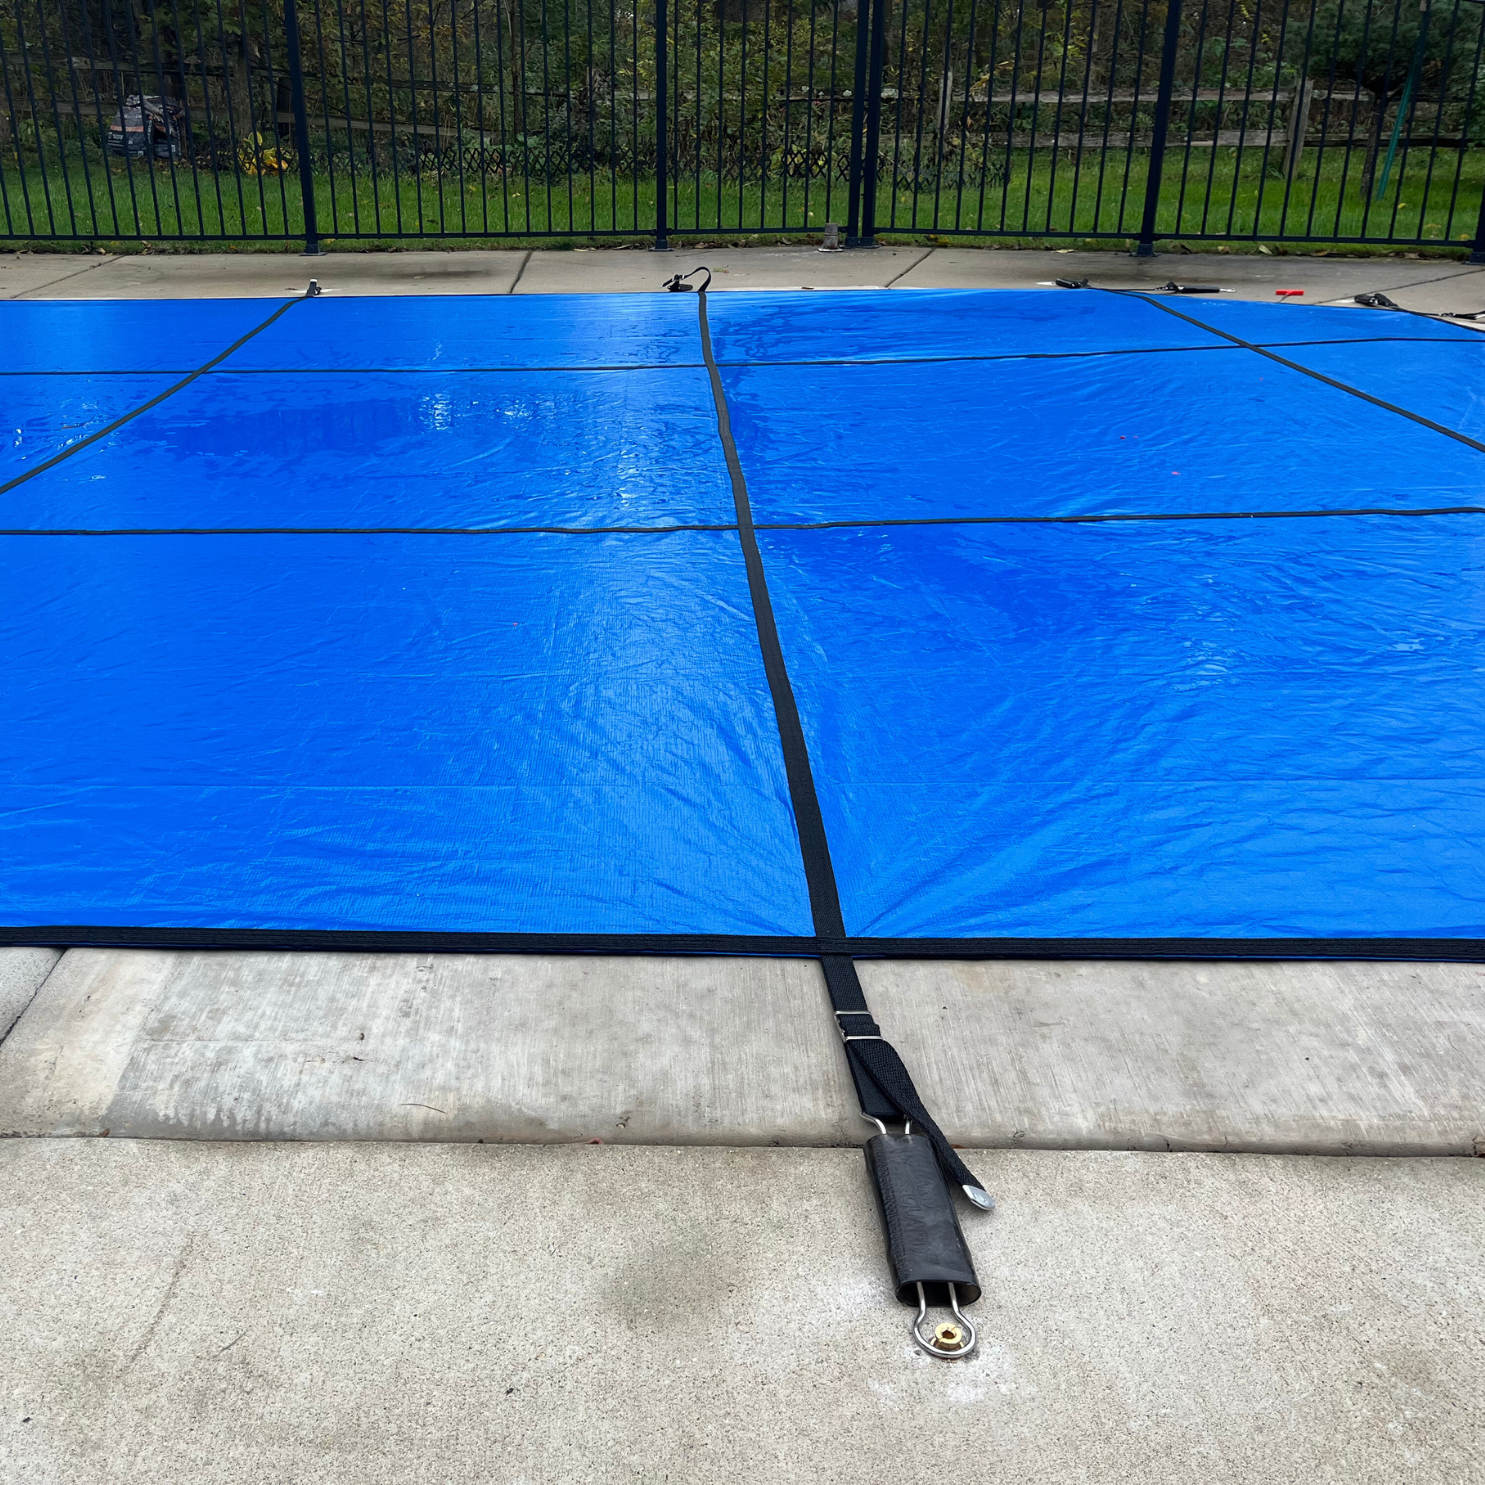 16' x 36' Rectangle Aquamaster 100% Solid Safety Pool Cover